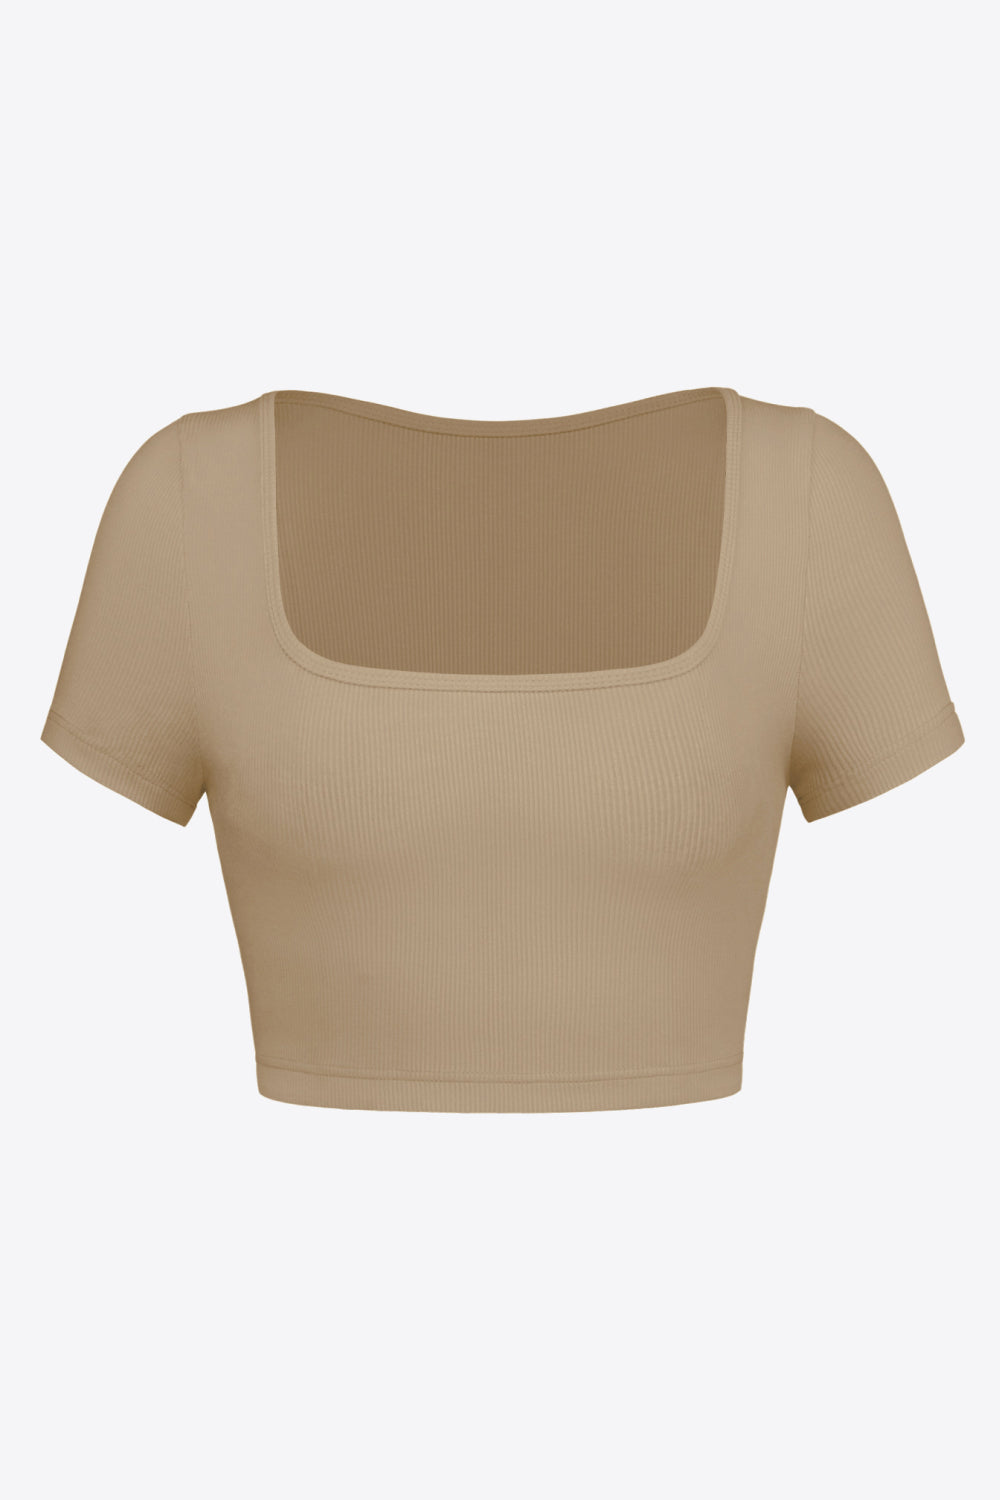 Square Neck Ribbed Crop Top - Women’s Clothing & Accessories - Shirts & Tops - 11 - 2024